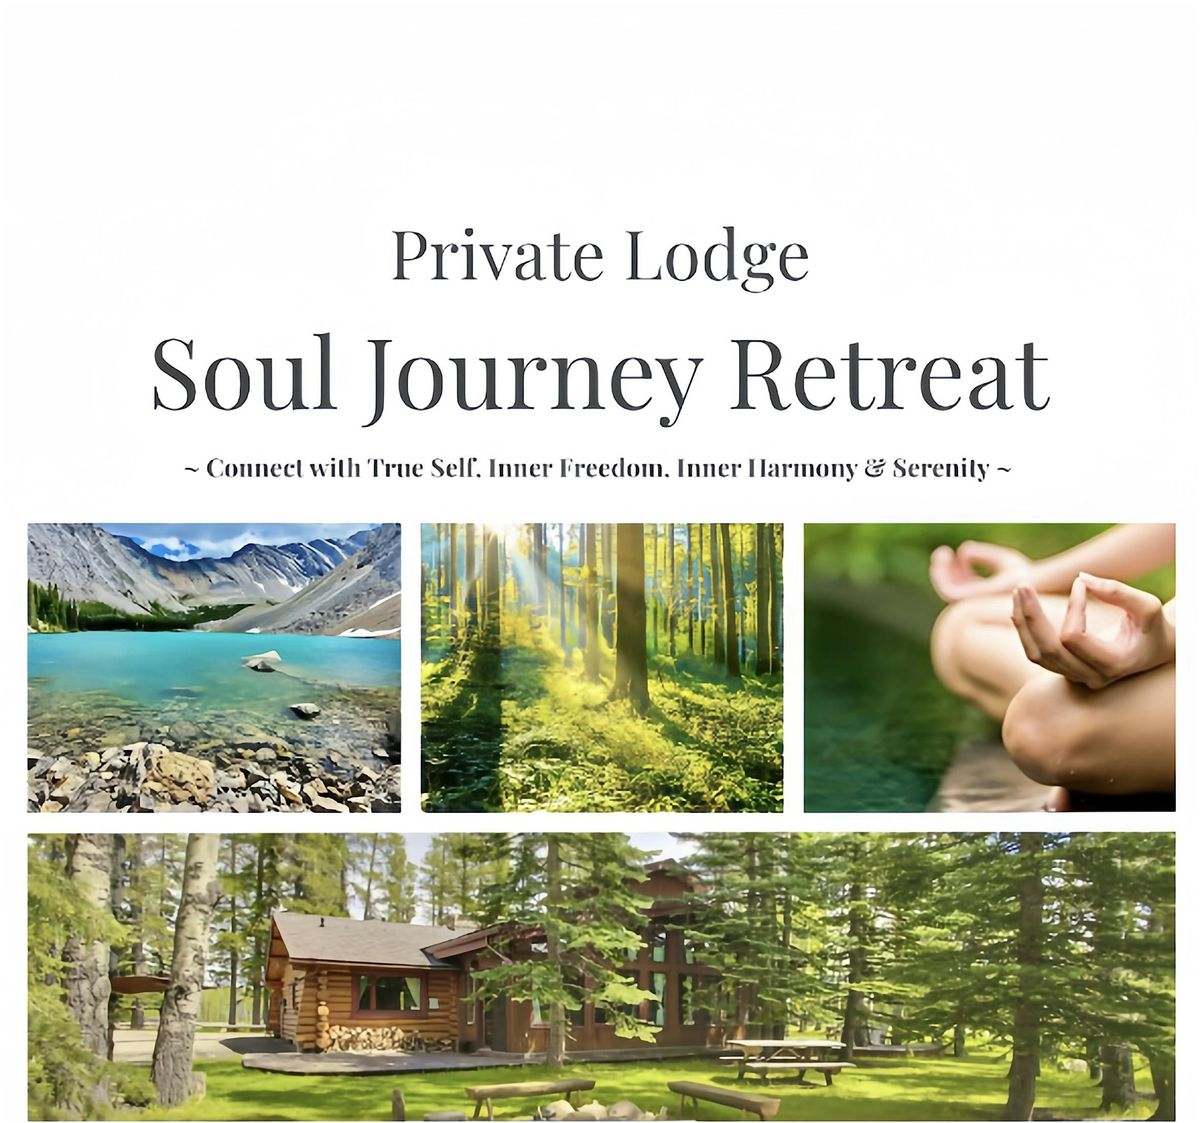 2-Days Soul Journey Retreat| Connect True Self, Inner Freedom & Serenity